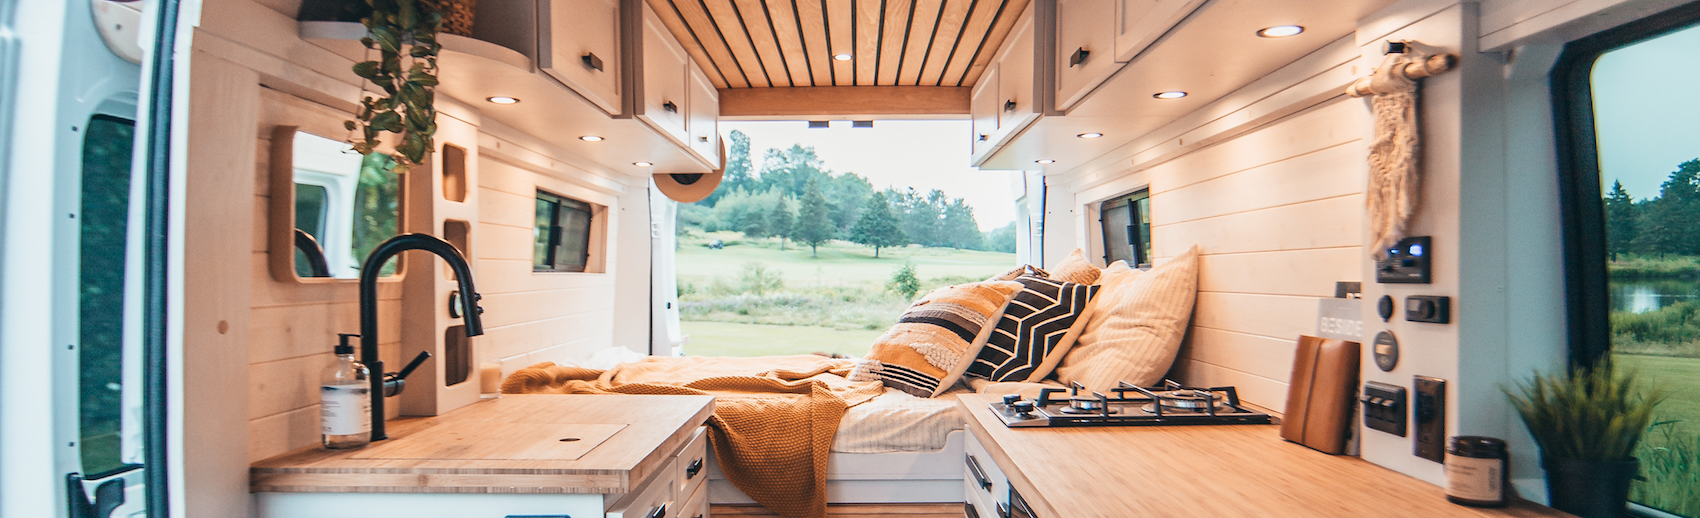 DIY Van Conversion: Step by Step Guide from Start to Finish